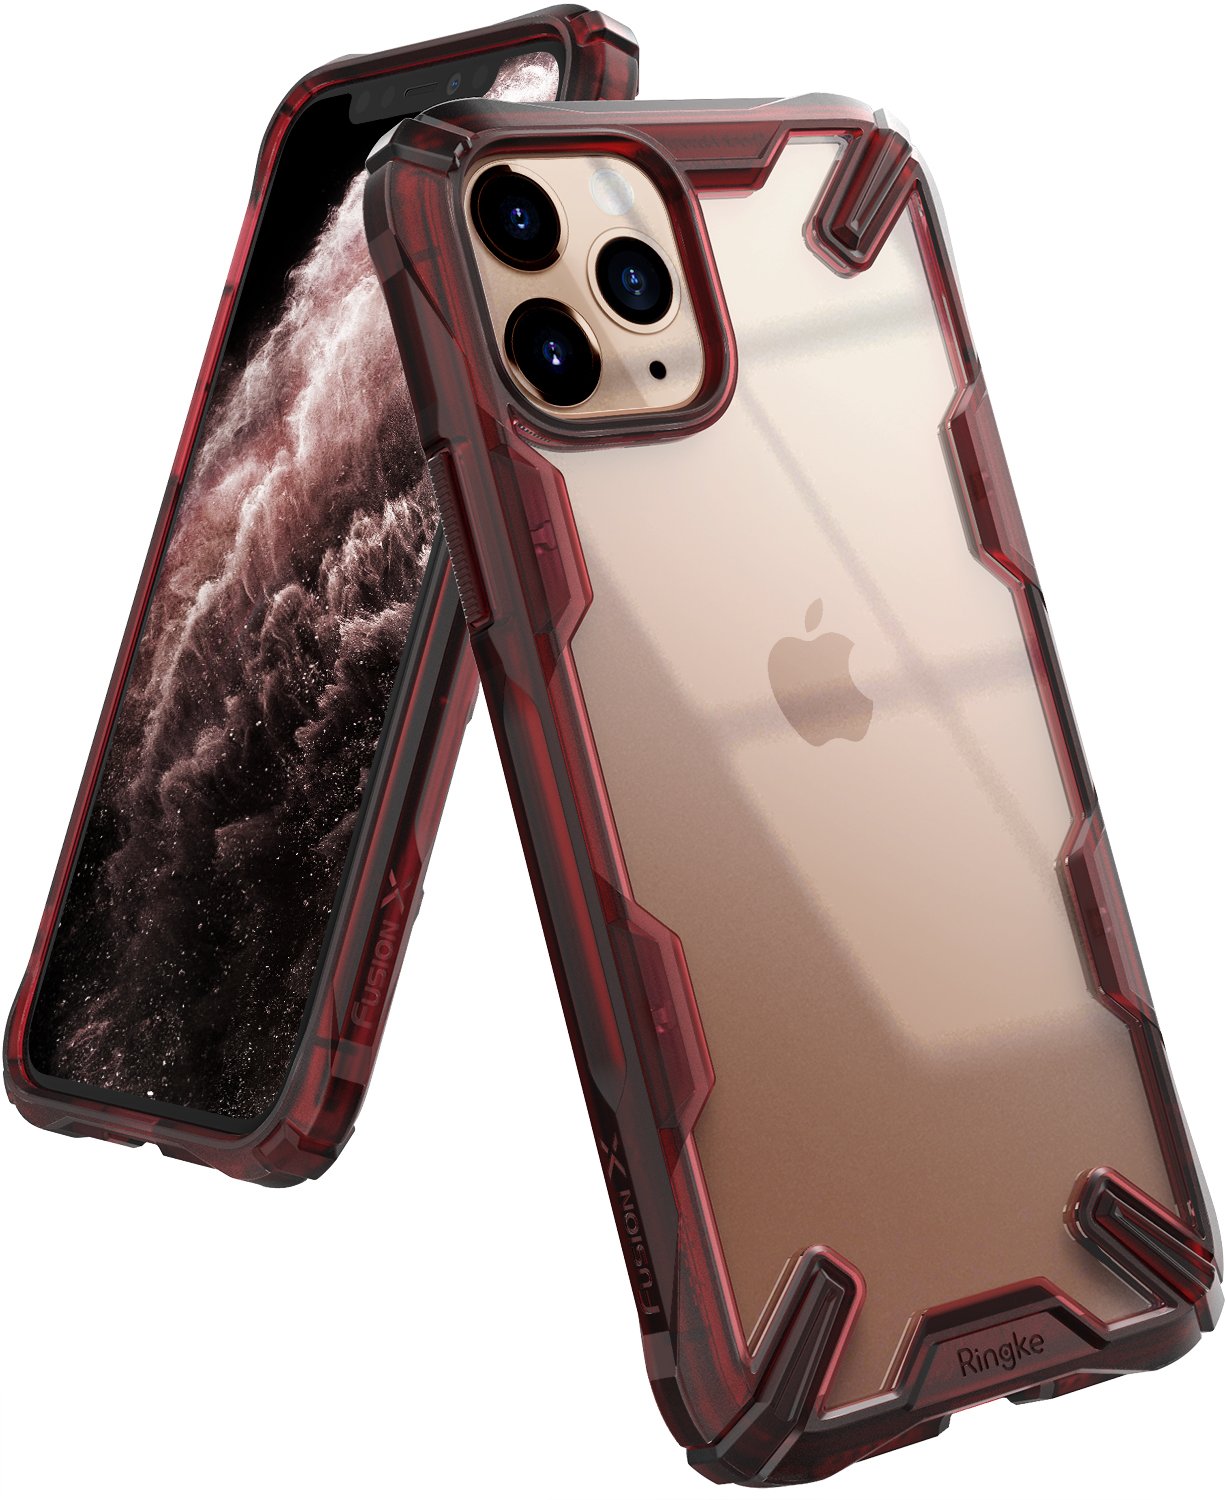 Ringke Fusion X Designed for apple iPhone 11 Pro MAX Case ruby red